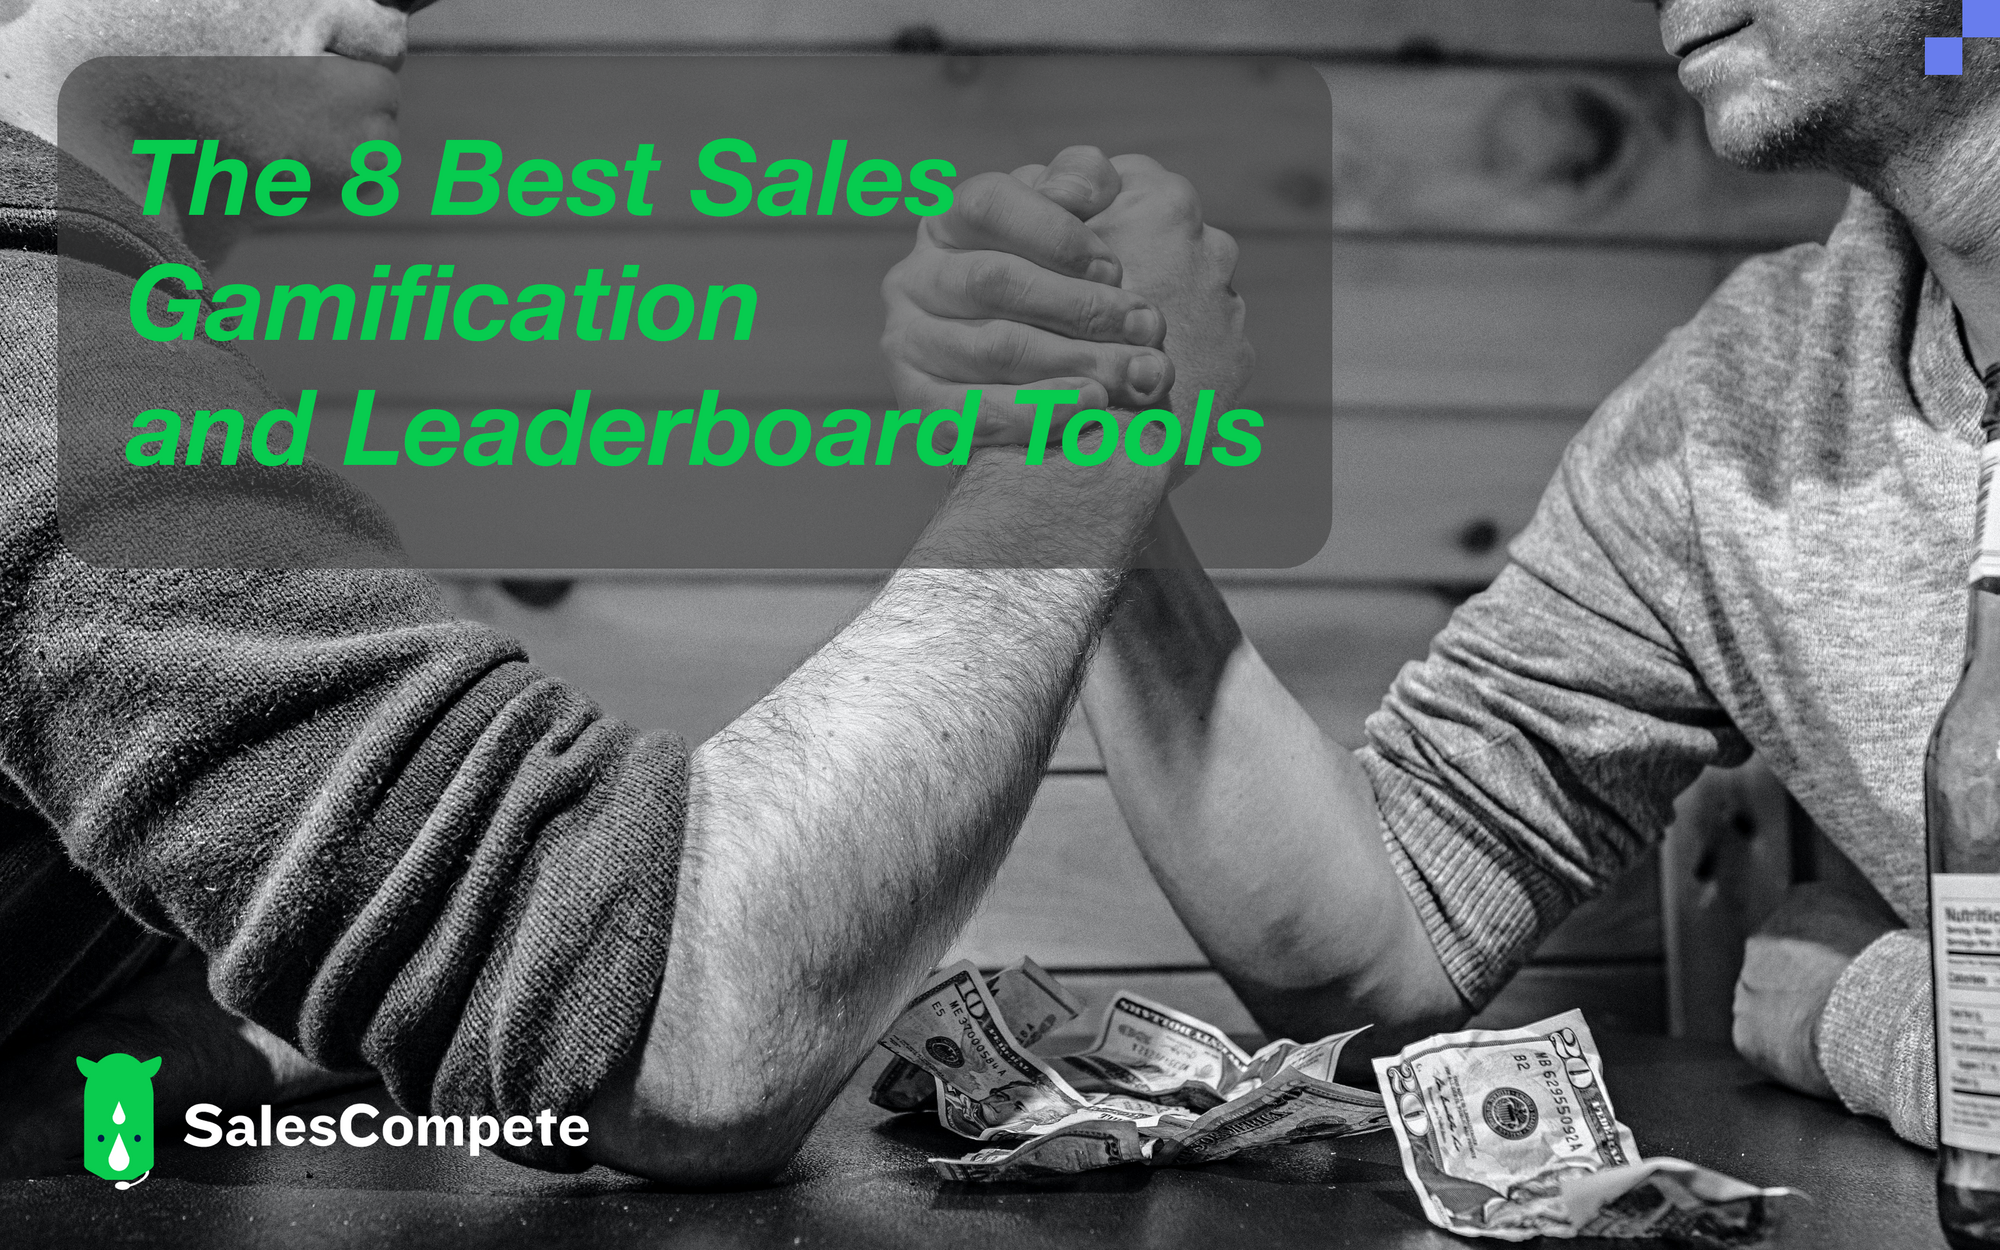 📊 The 8 Best Sales Gamification & Leaderboard Tools